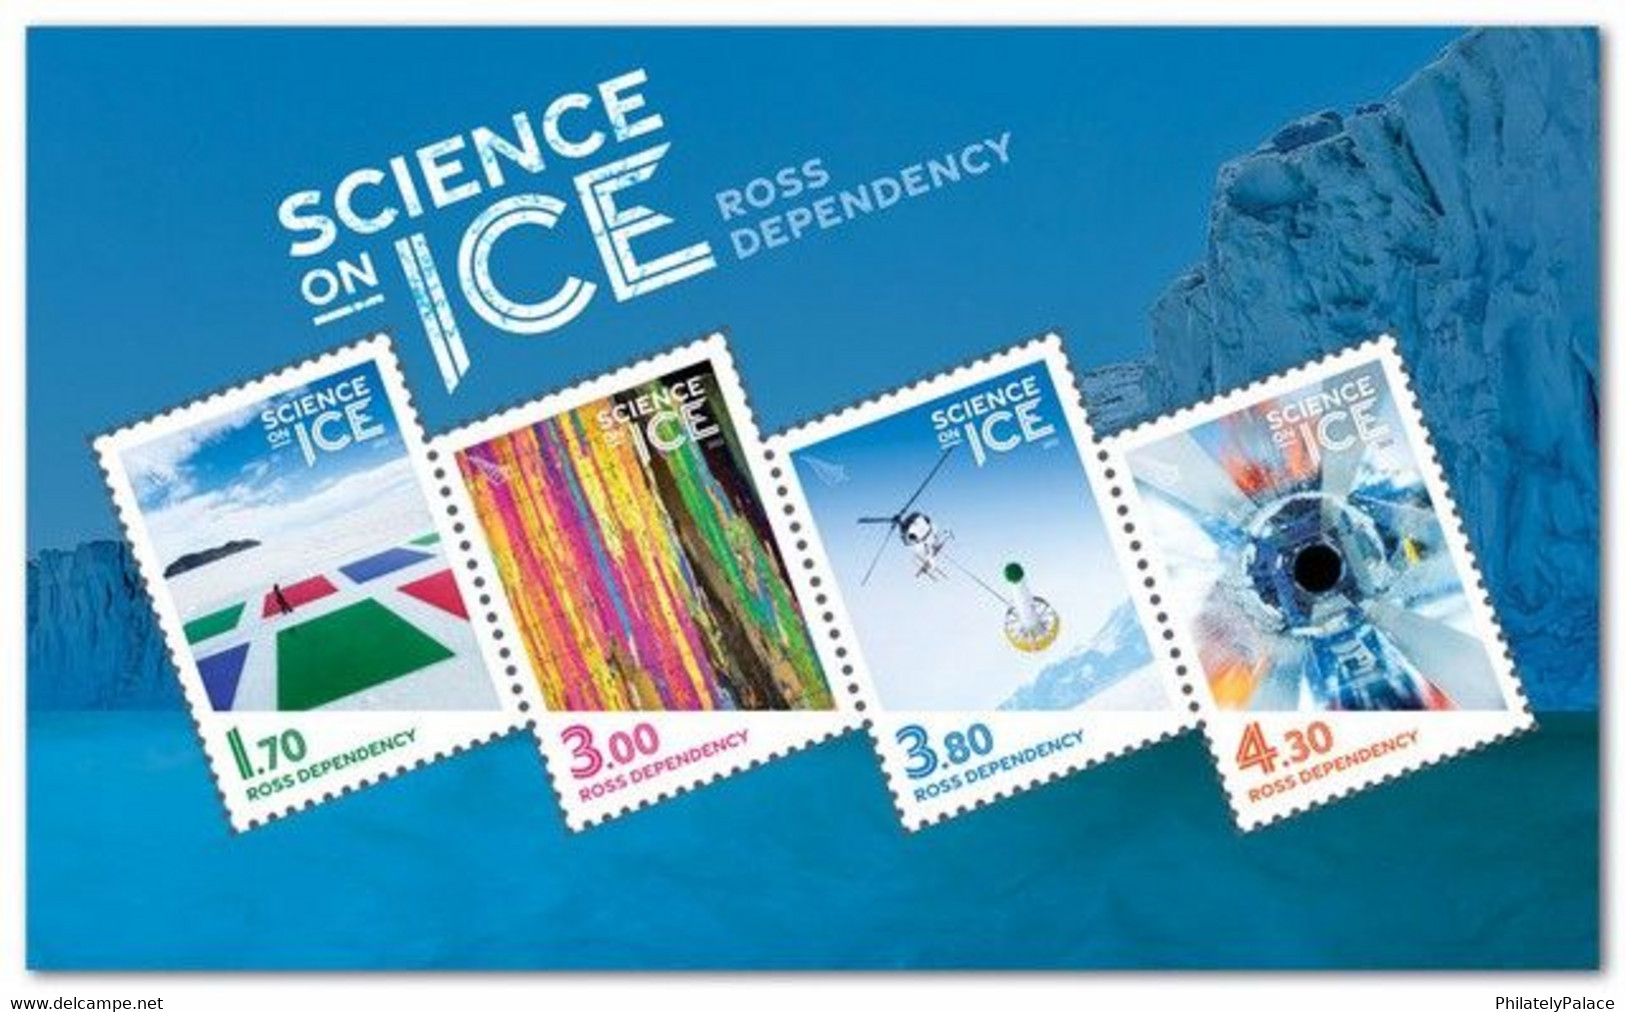 Ross Dependency 2022 ( New Zealand )- Science On Ice, Scientist Experiment, Research,Presentation Pack MNH (**) - Neufs